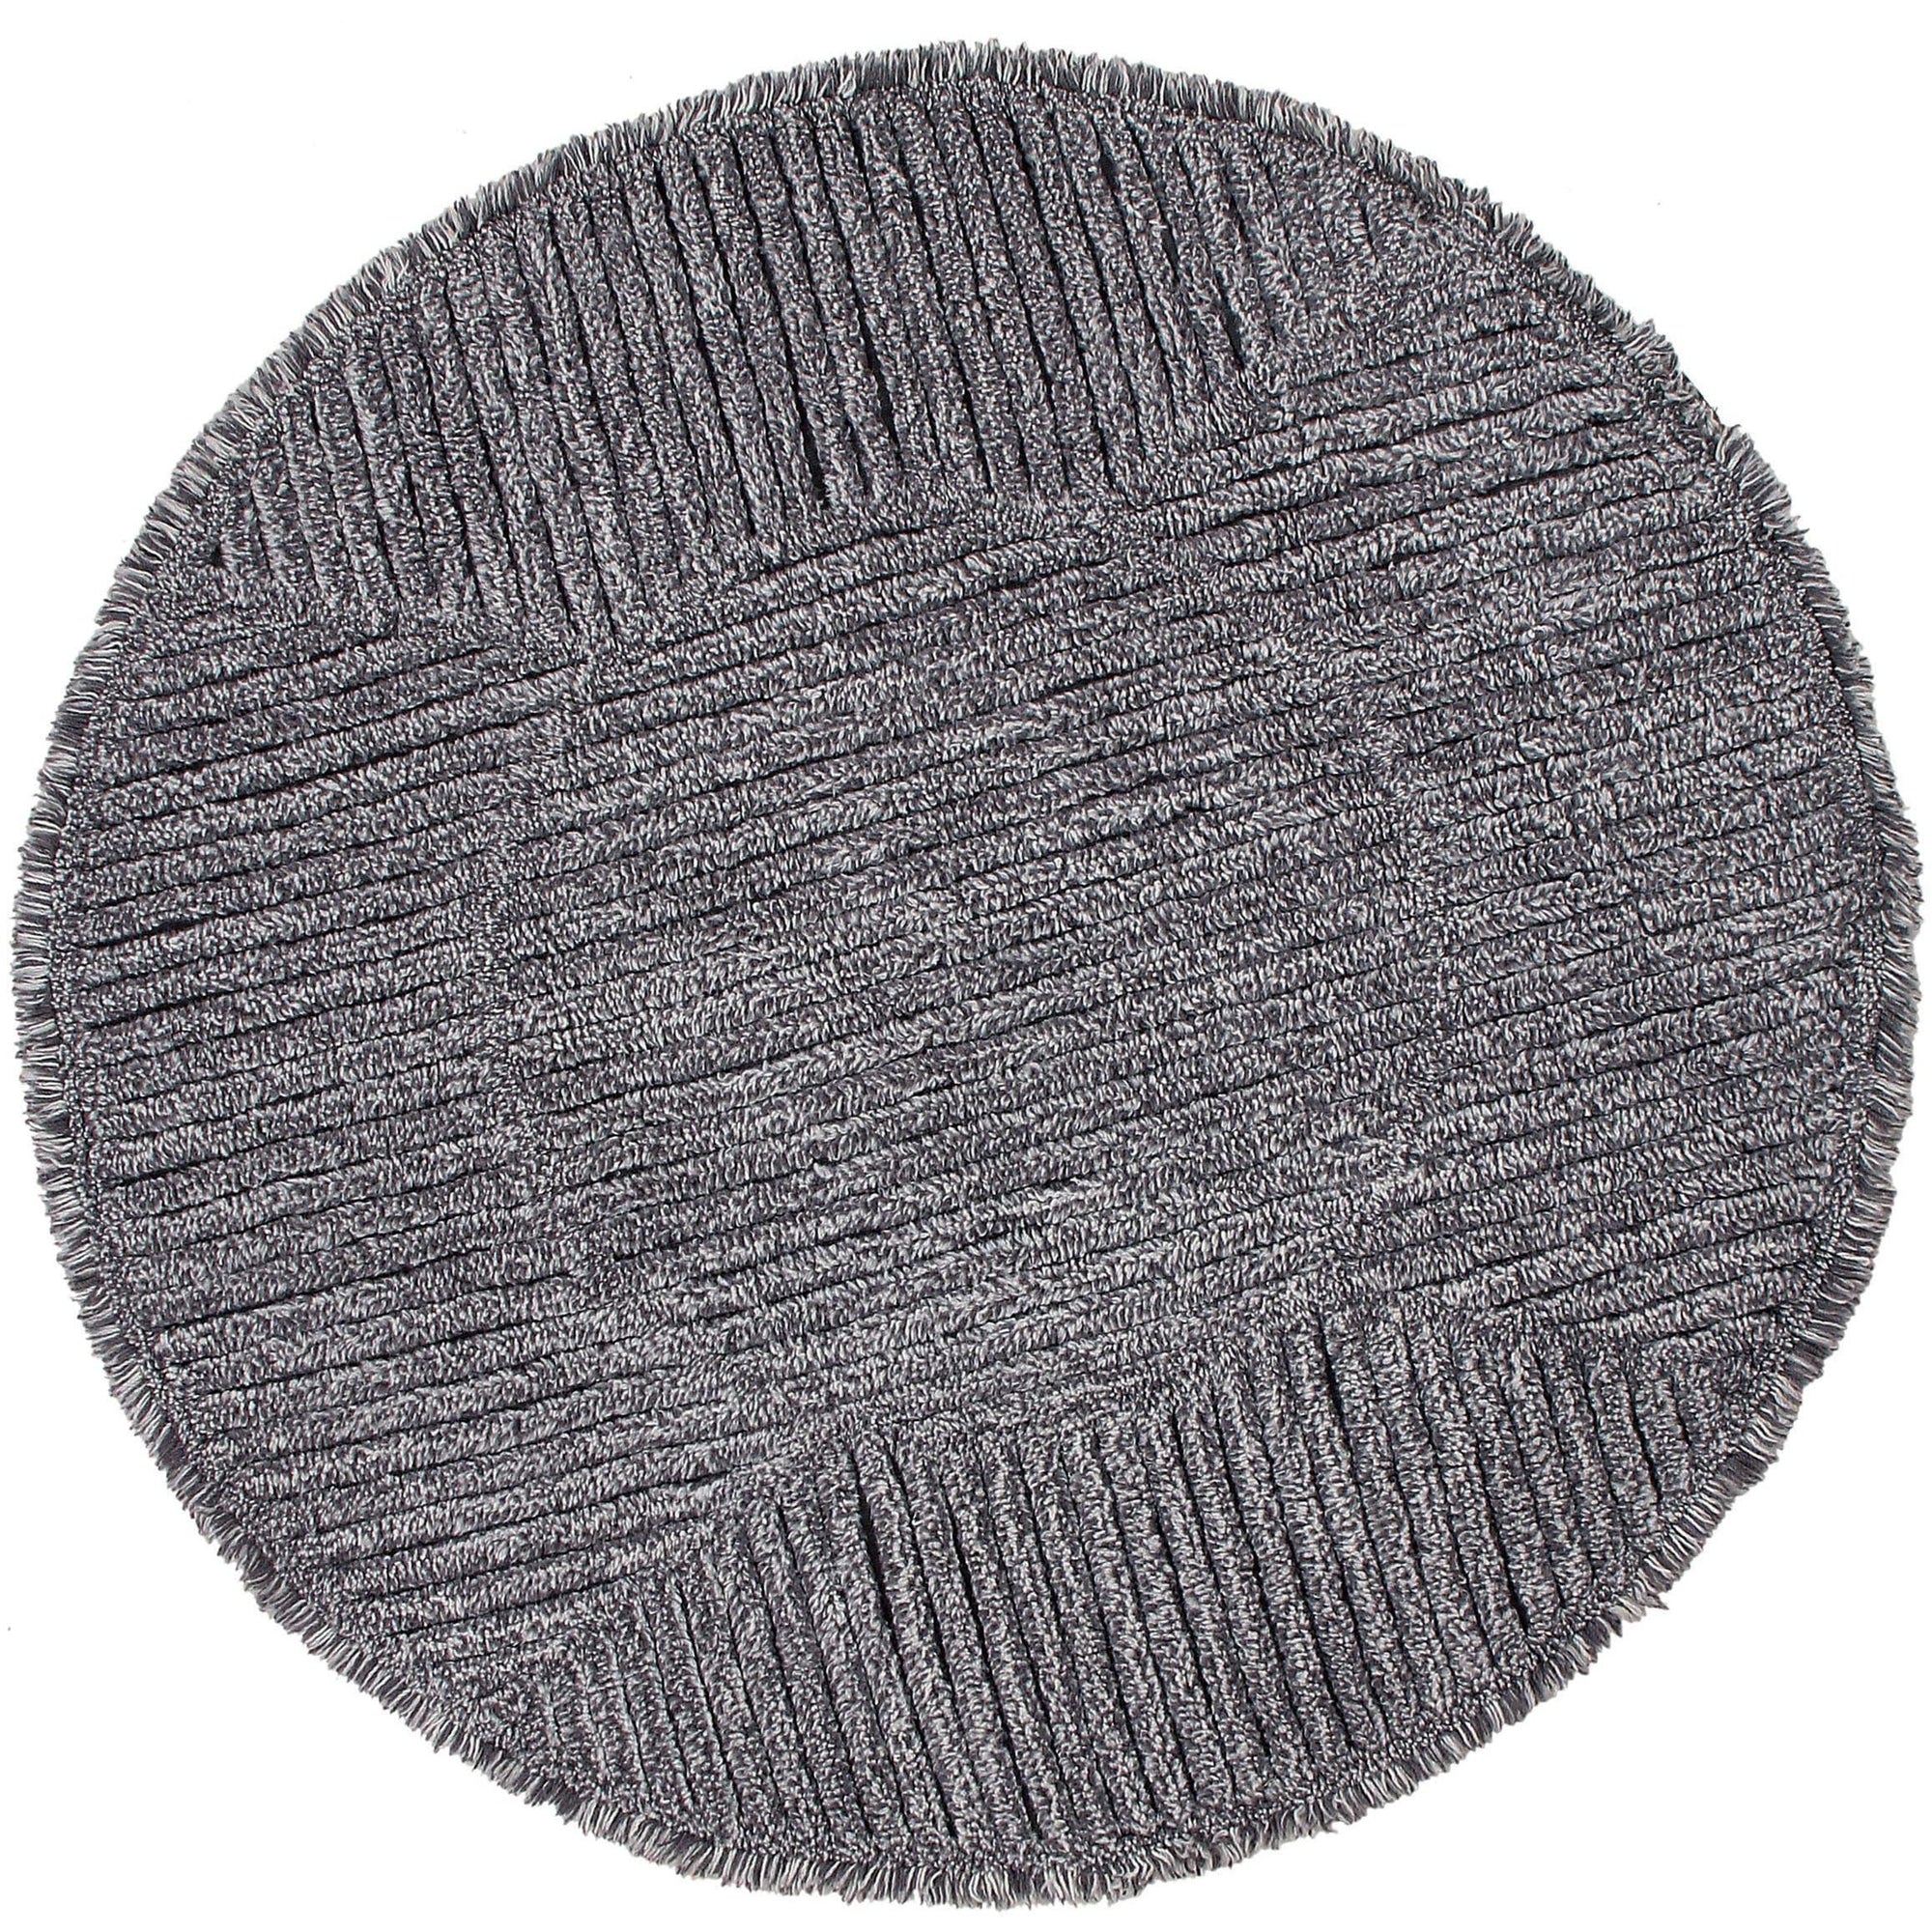 Rugs by Roo | Lorena Canals Black Tea Wool Washable Area Rug-WO-BLACKTEA